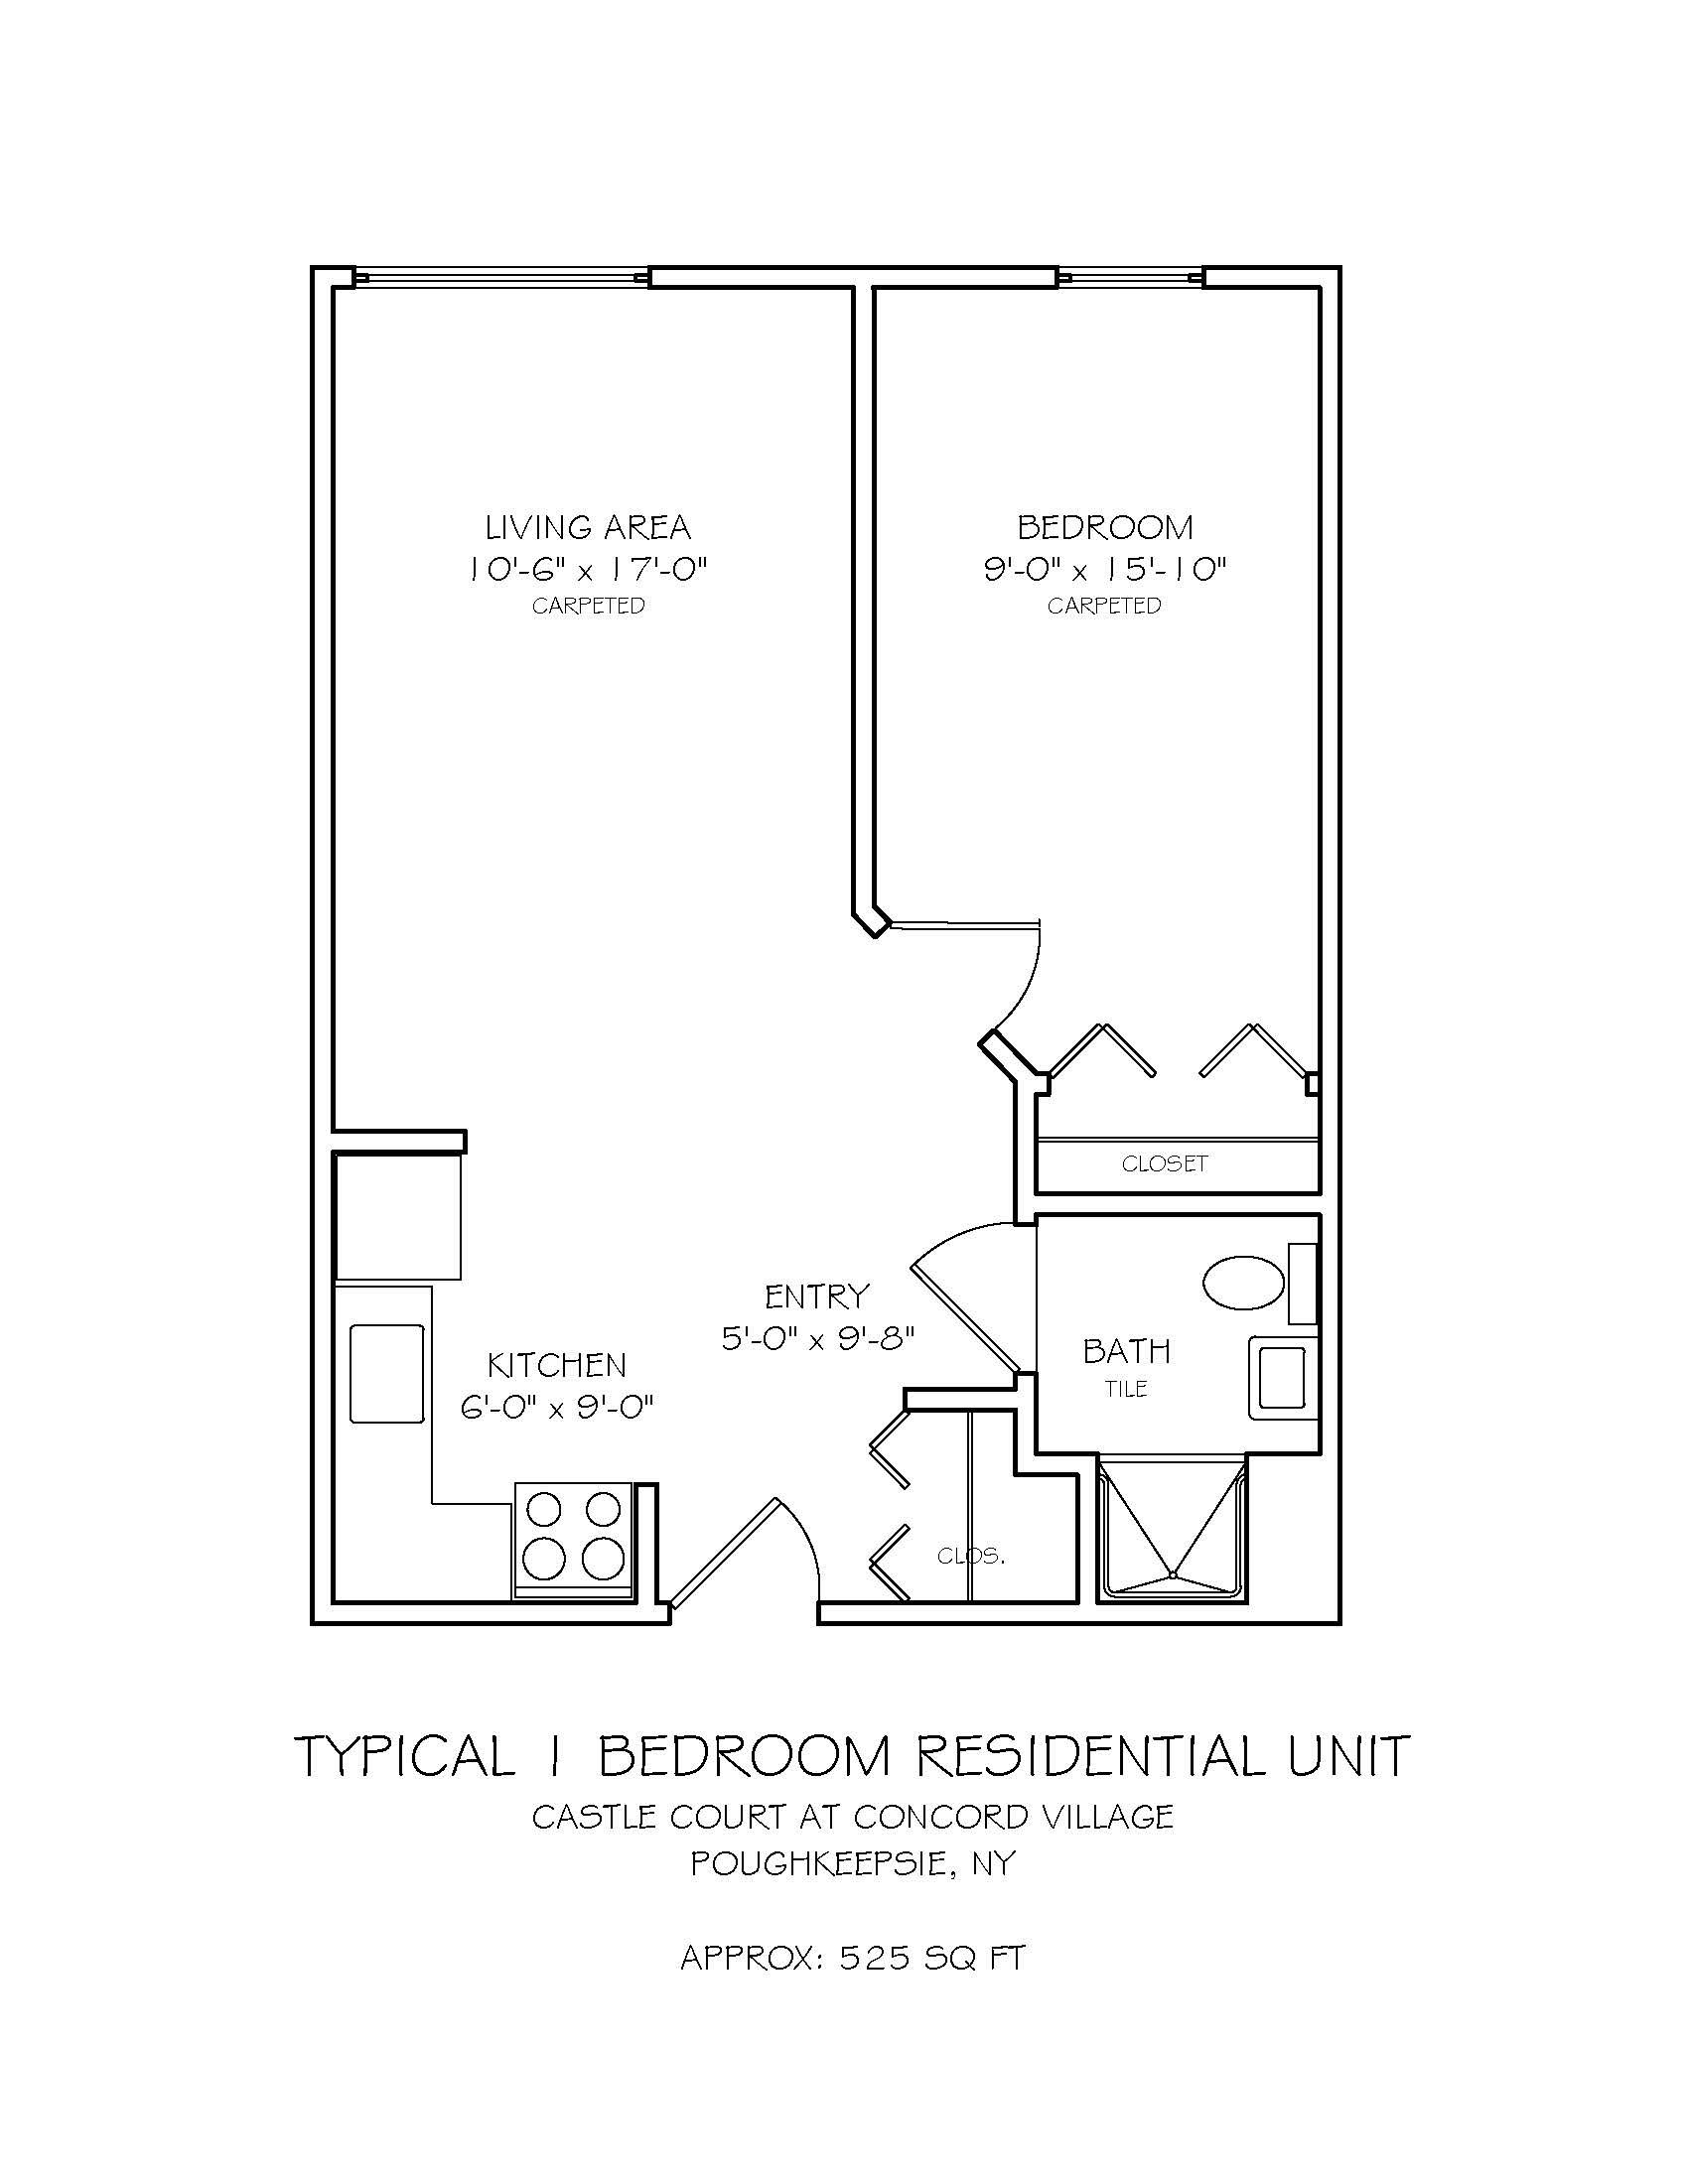 Click to View Enlarged Floor Plan